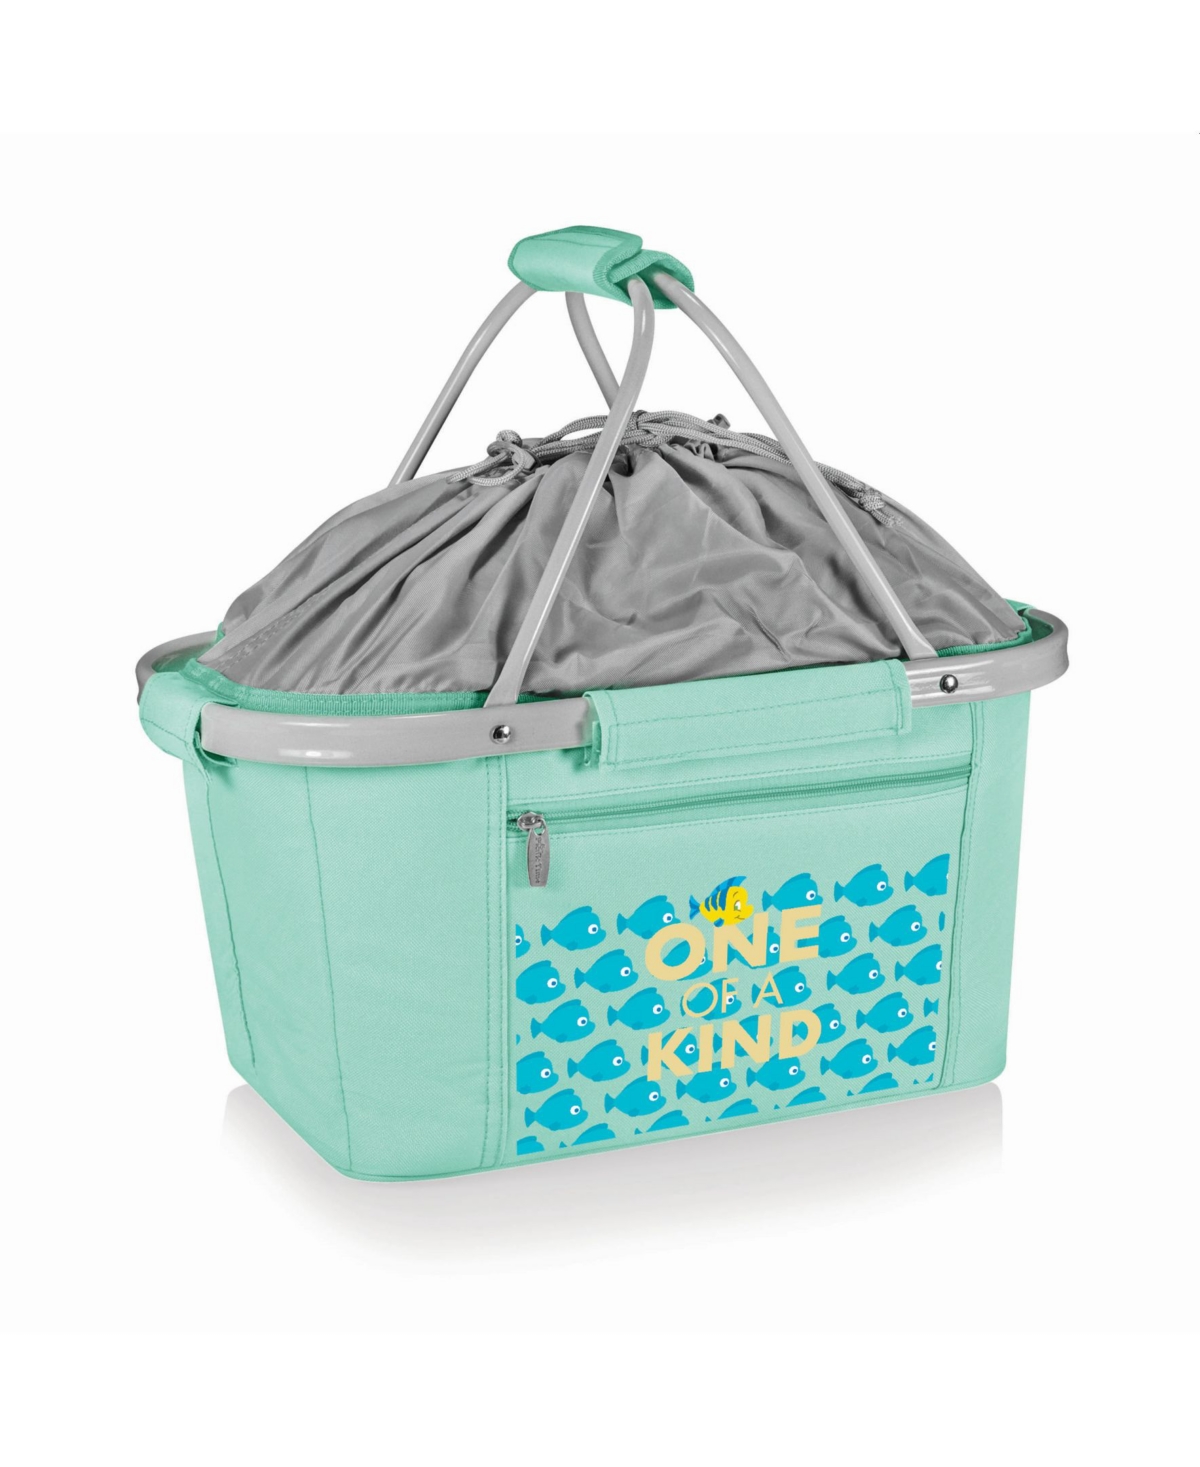 The Little Mermaid Metro Basket Collapsible Cooler Tote - Teal